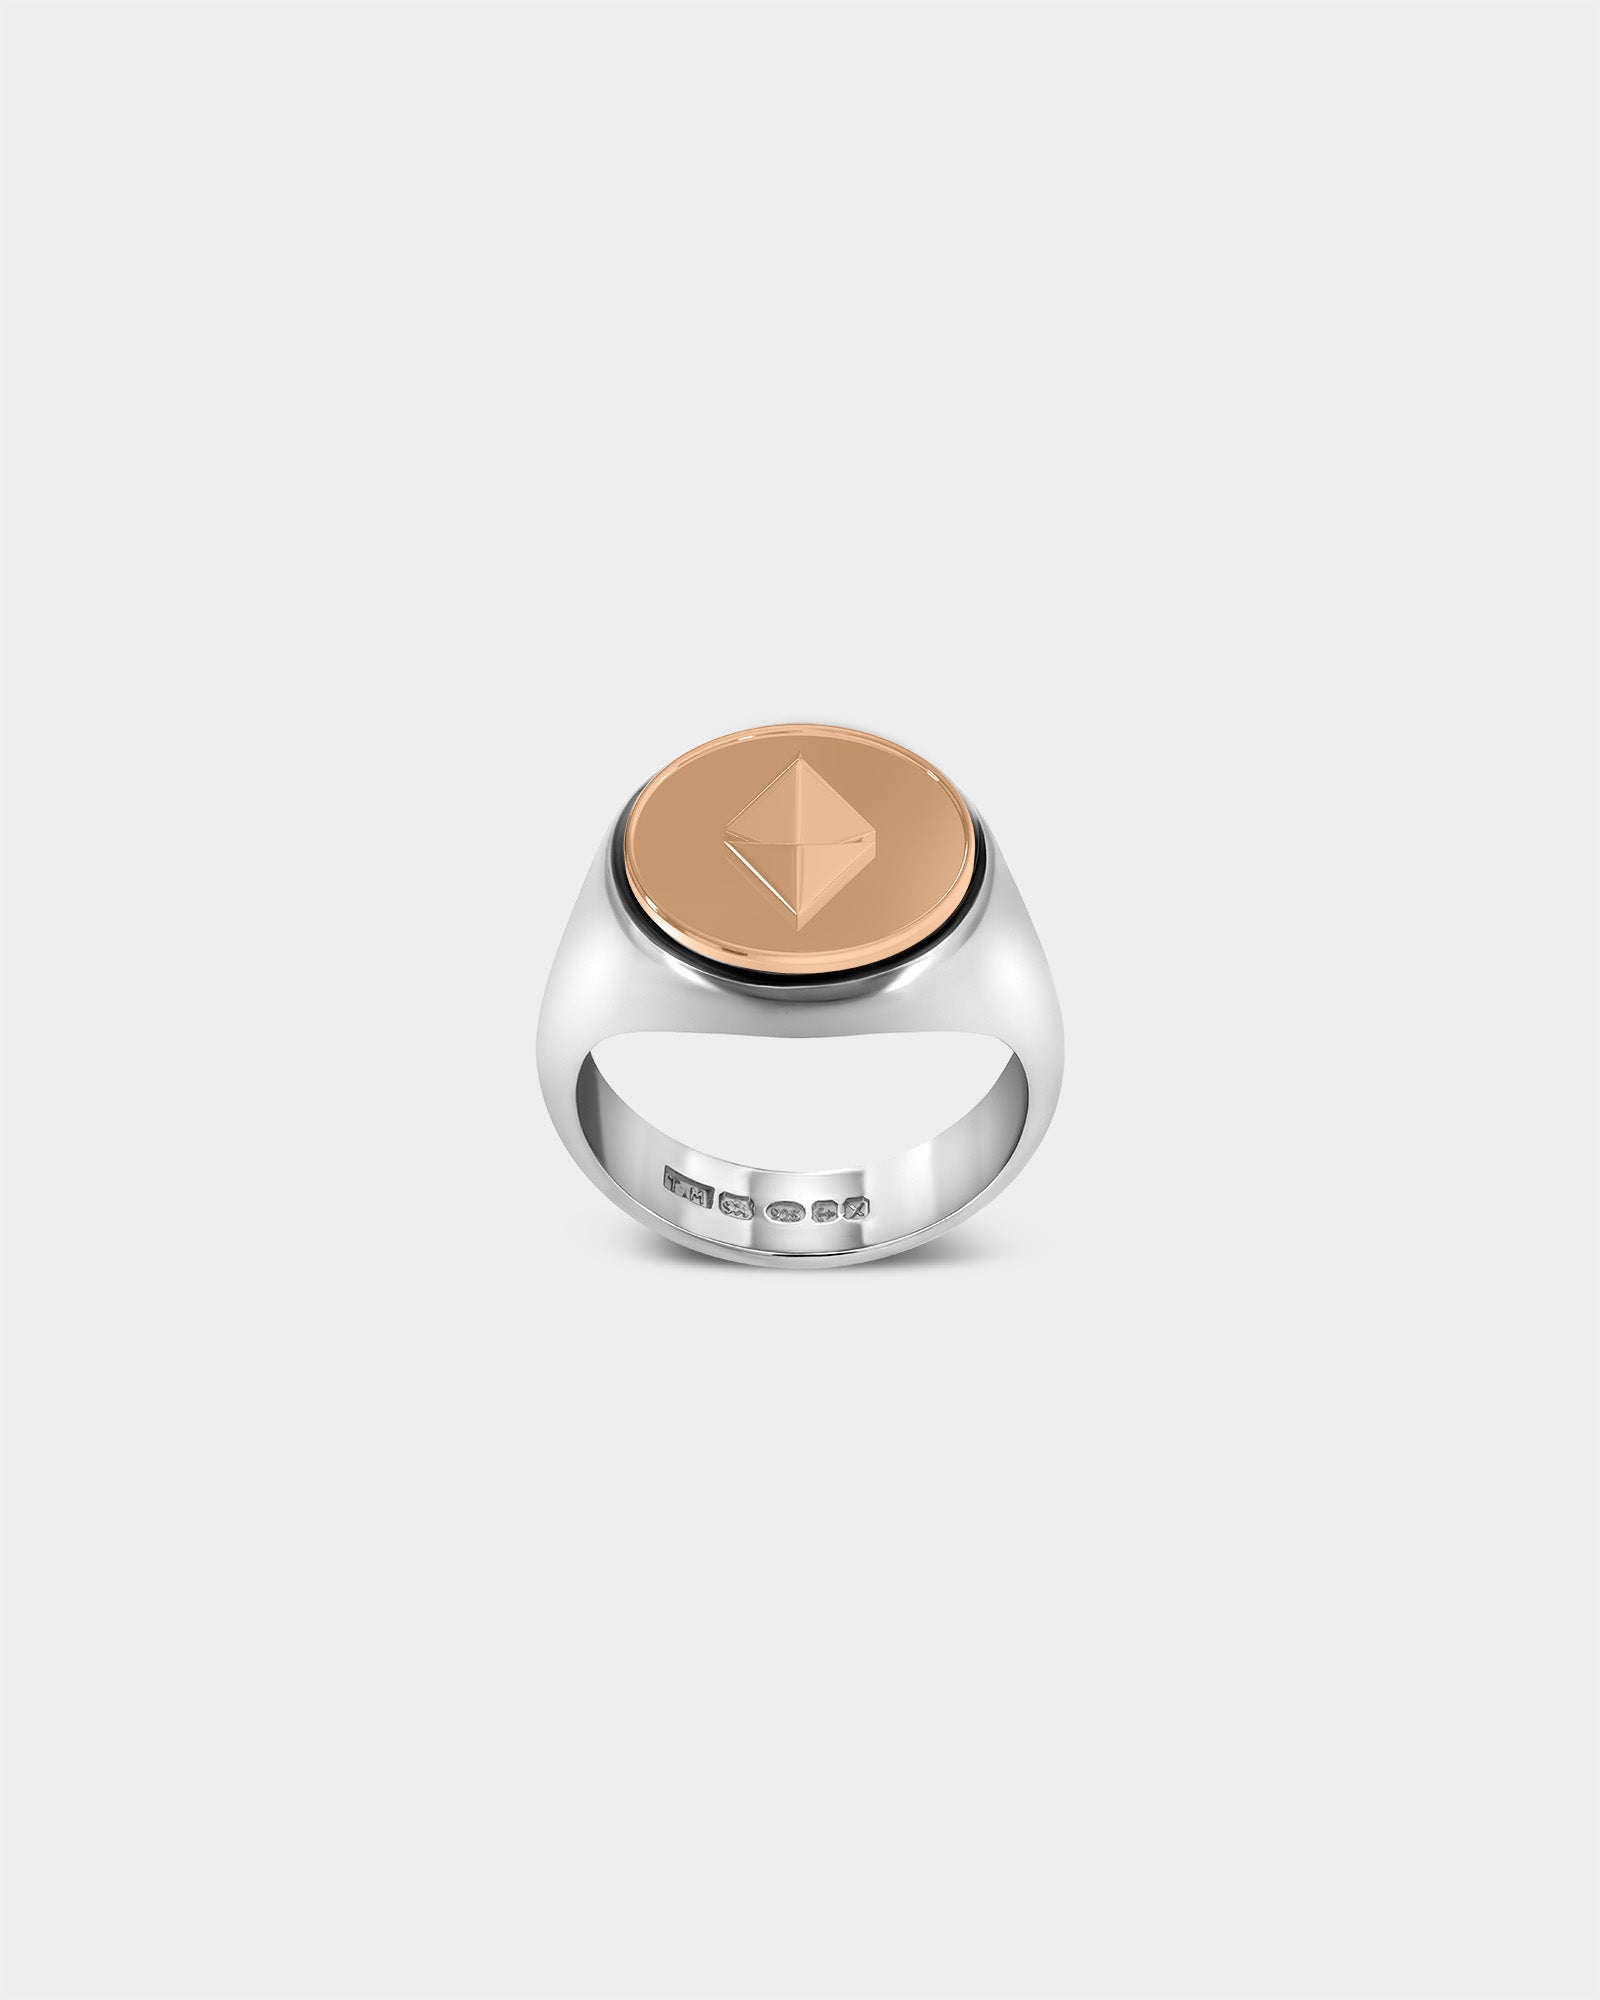 Large Ethereum Crypto Ring in Sterling Silver / 9k Rose Gold by Wilson Grant